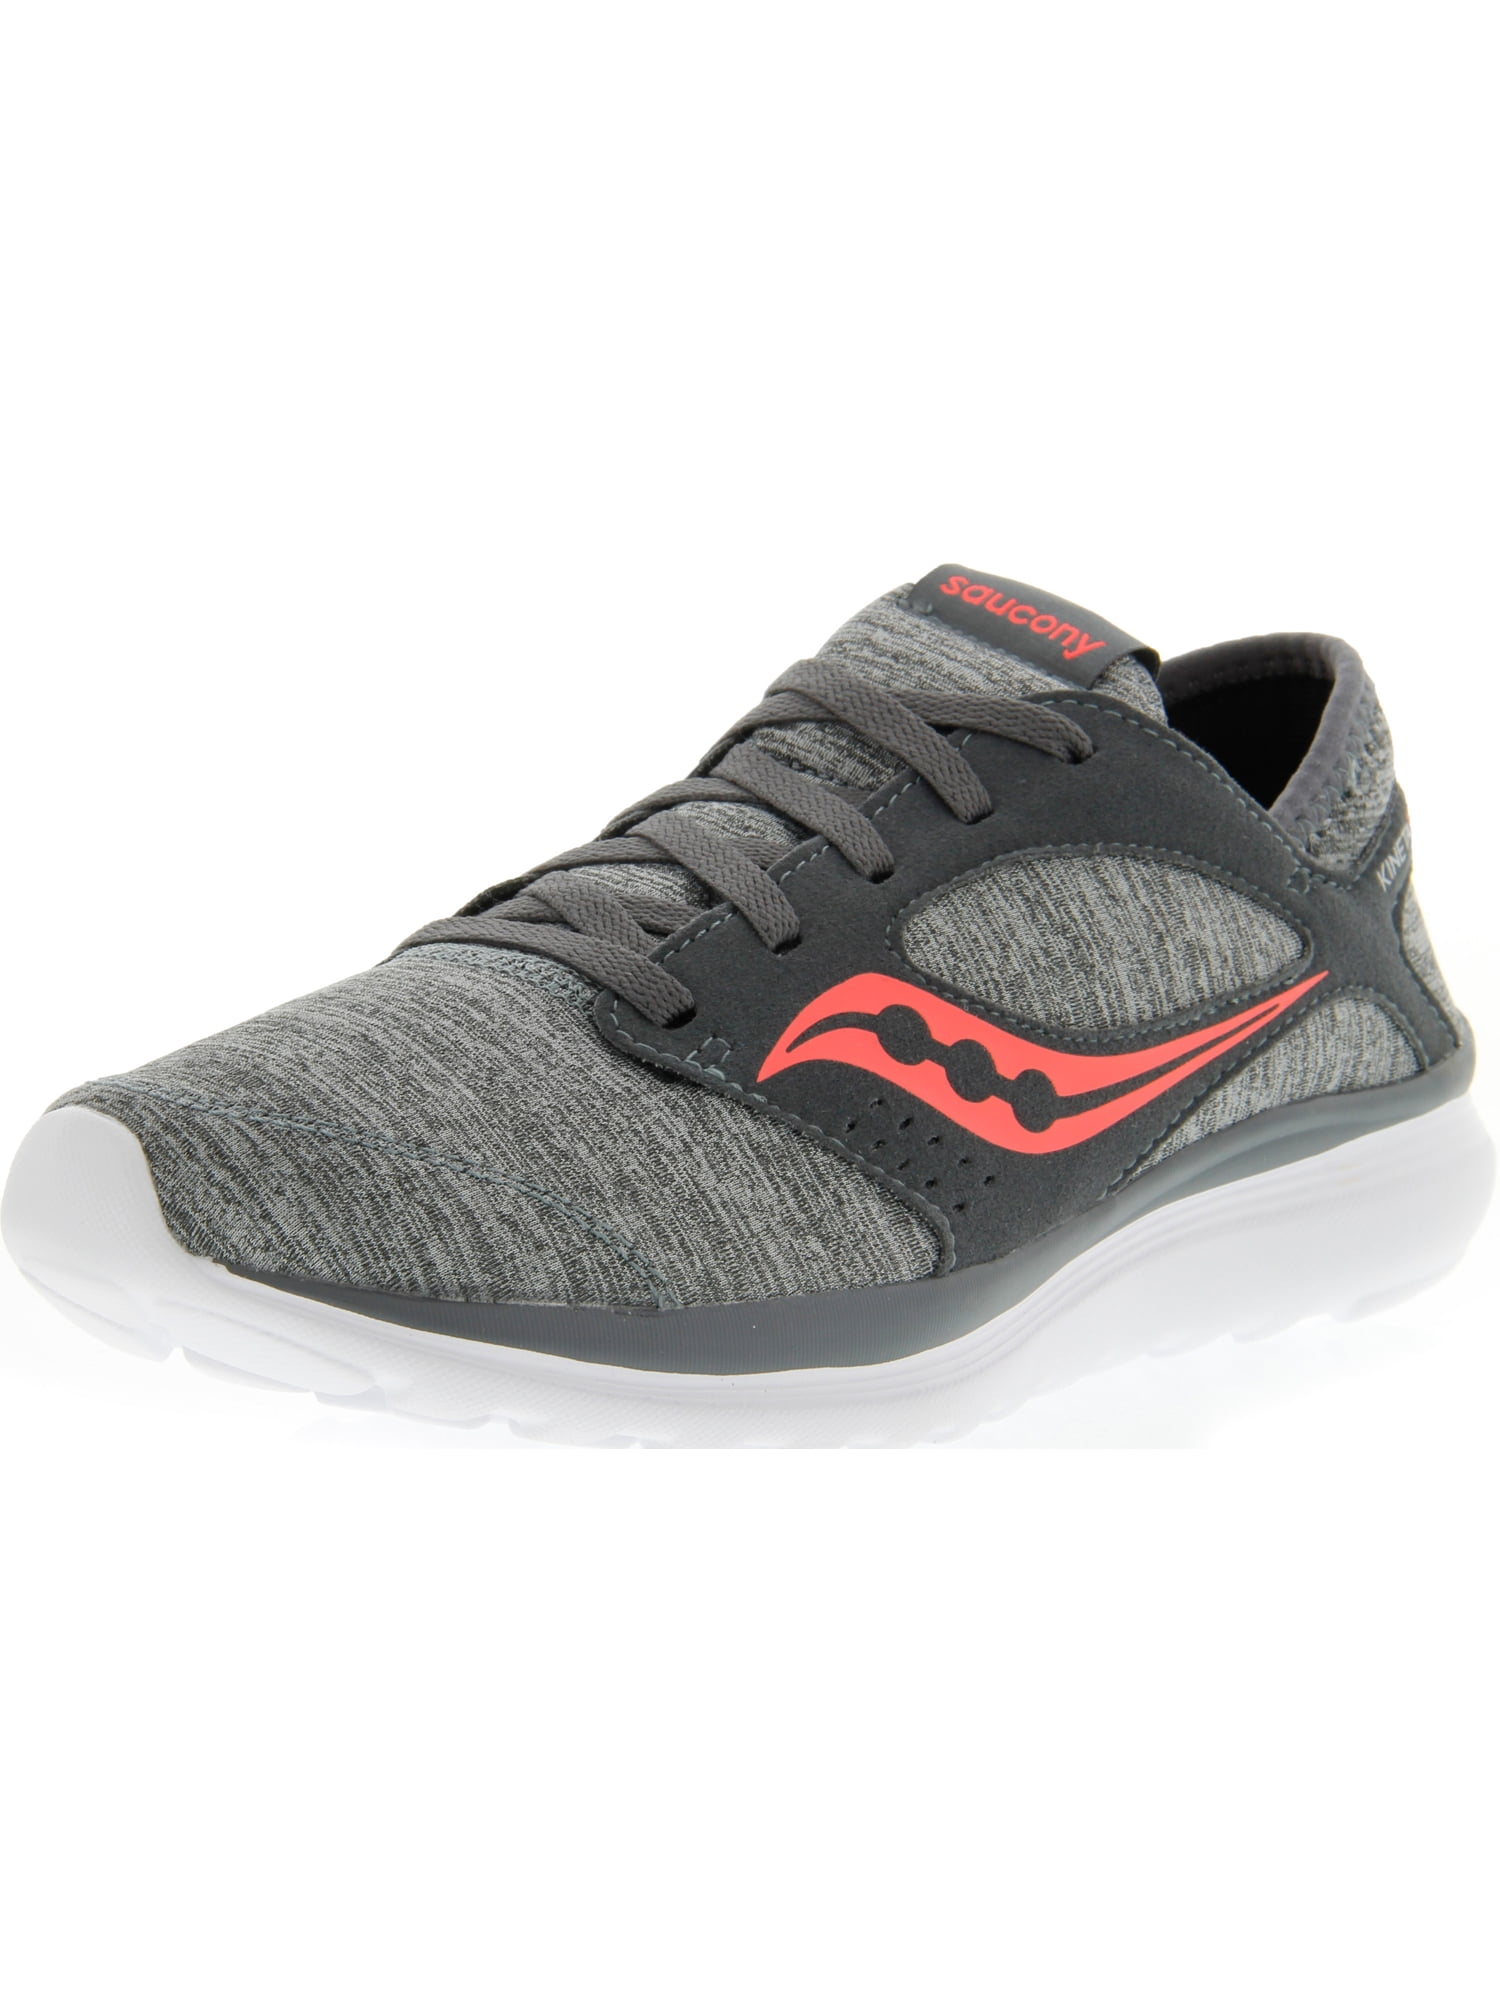 Coral Ankle-High Mesh Running Shoe 